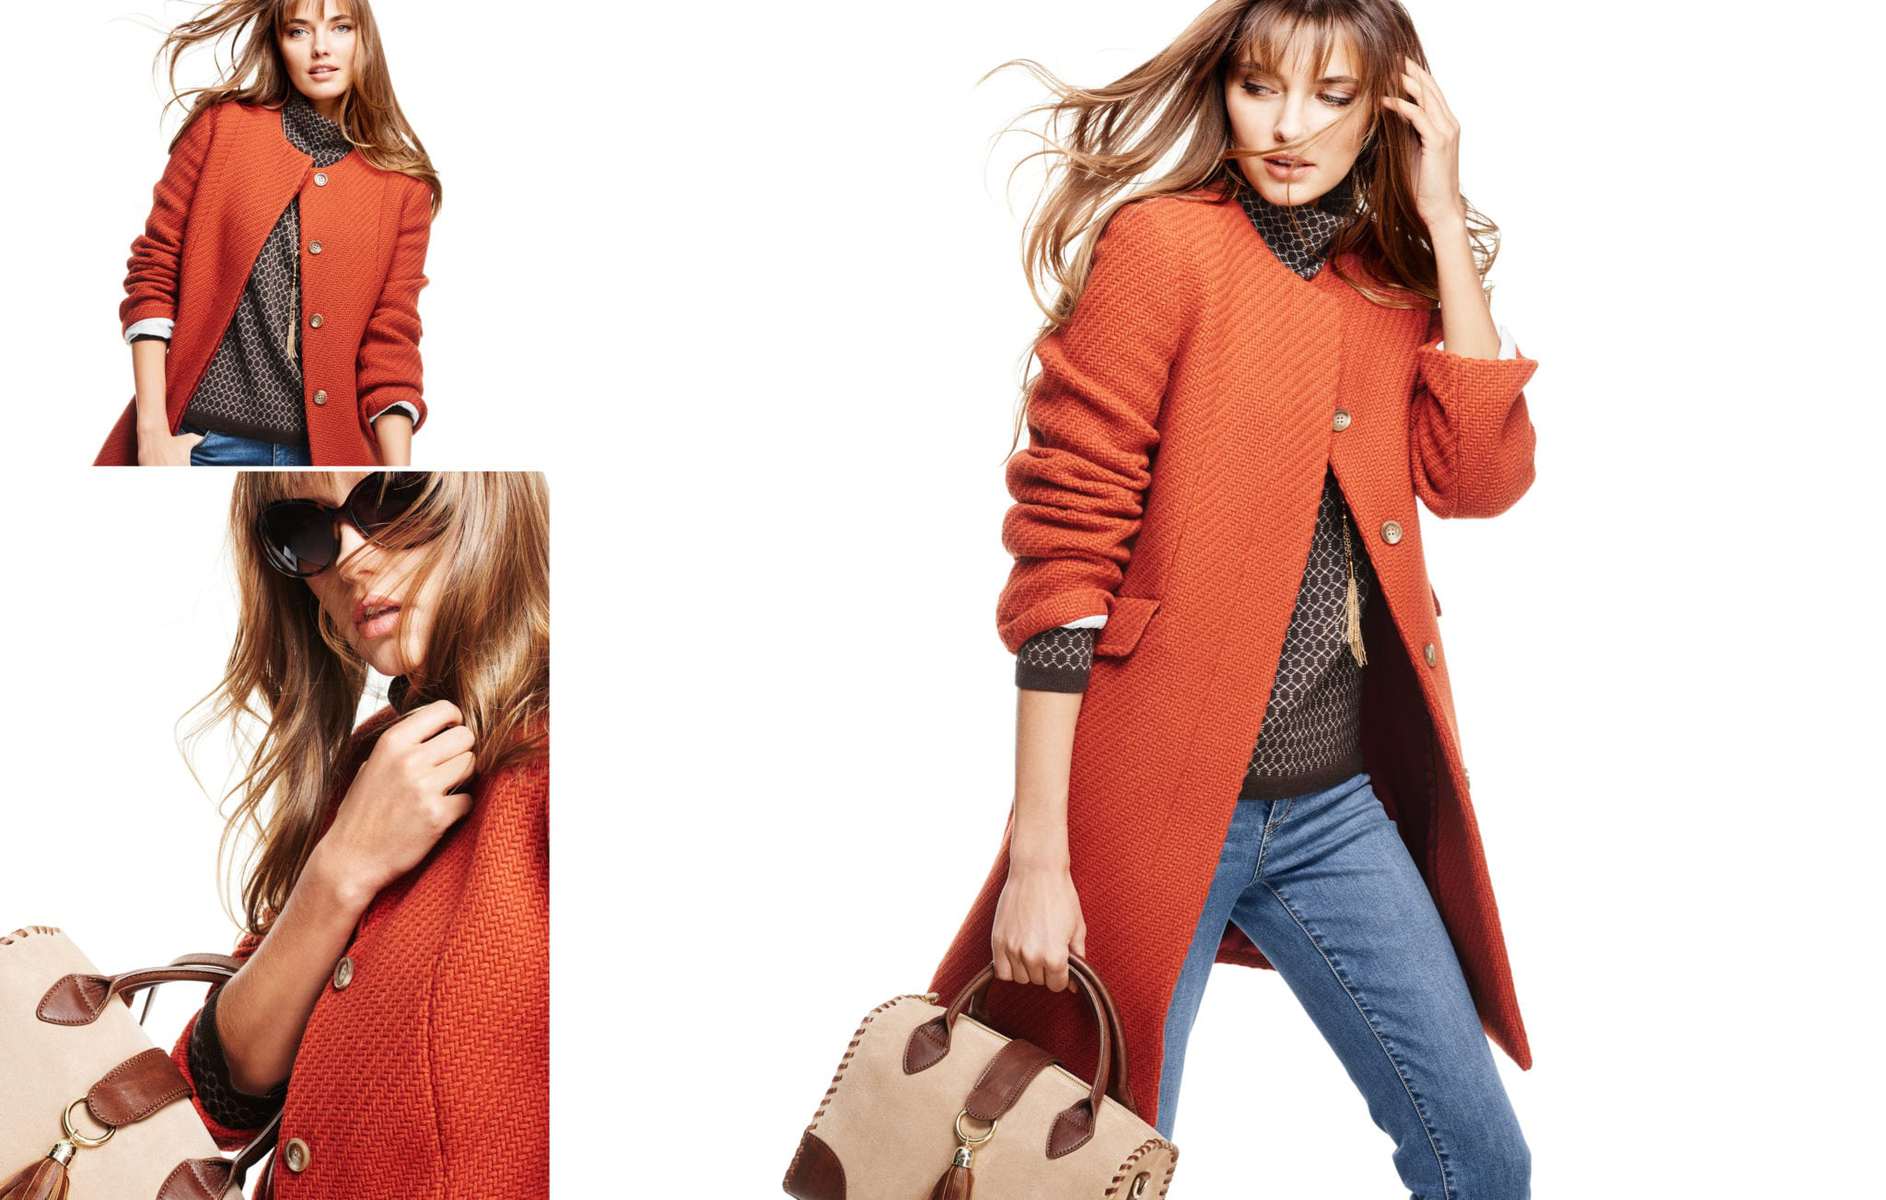 Talbots Fall 2015 Look Book Preview Featuring Orange Collarless Jacket